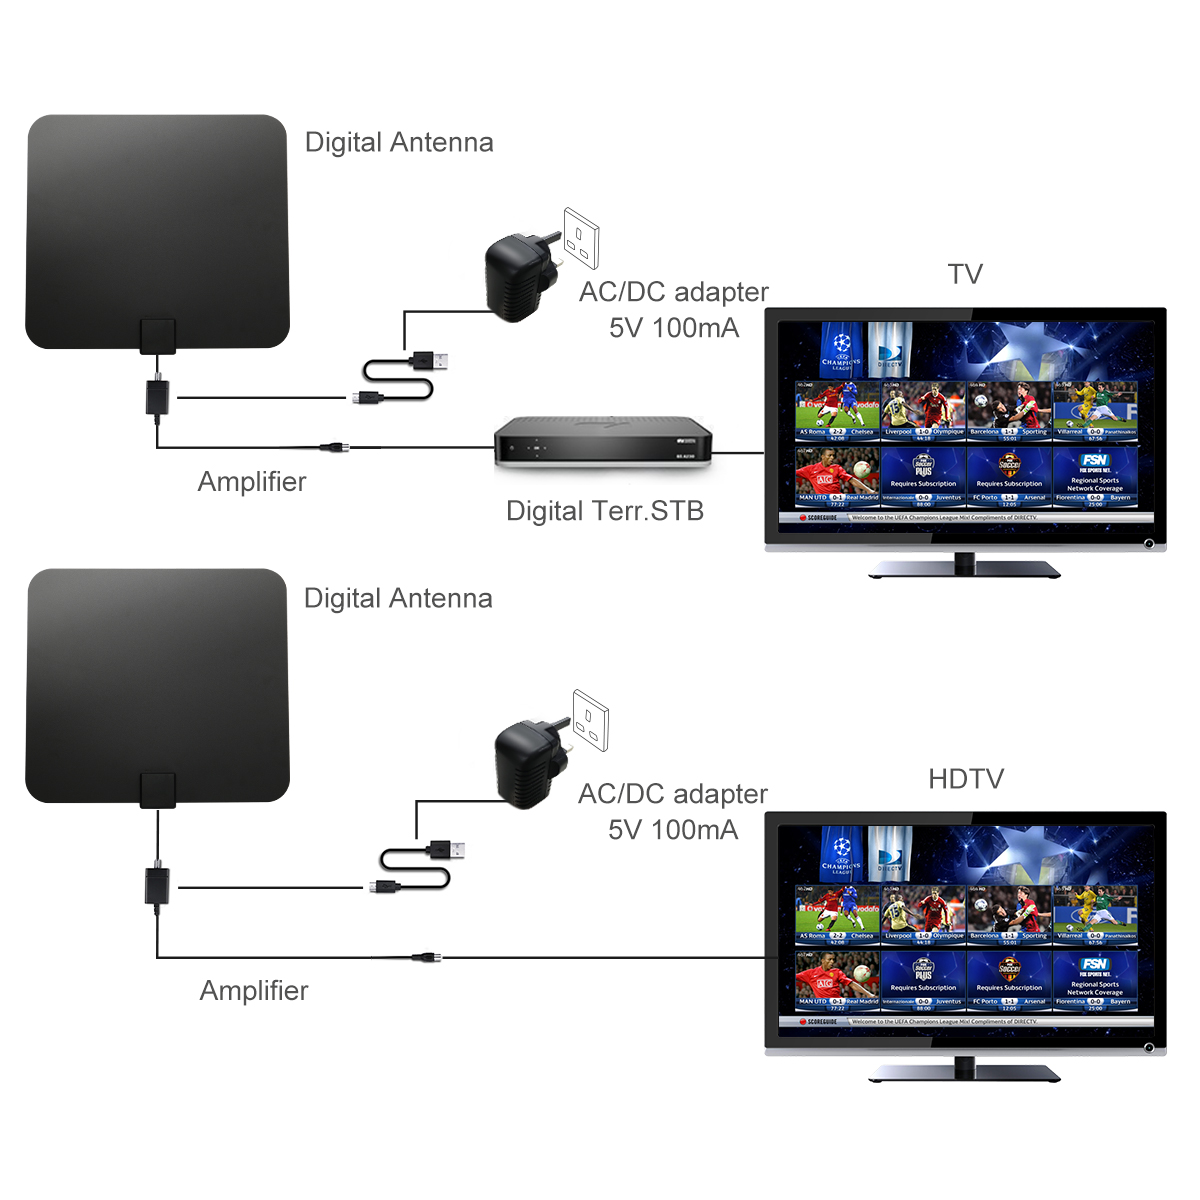 MECO-TV-Antenna-Indoor-TV-Antenna-Ultra-thin-Amplified-50-mile-digital-HDTV-antenna-with-amplifier-s-1974825-6